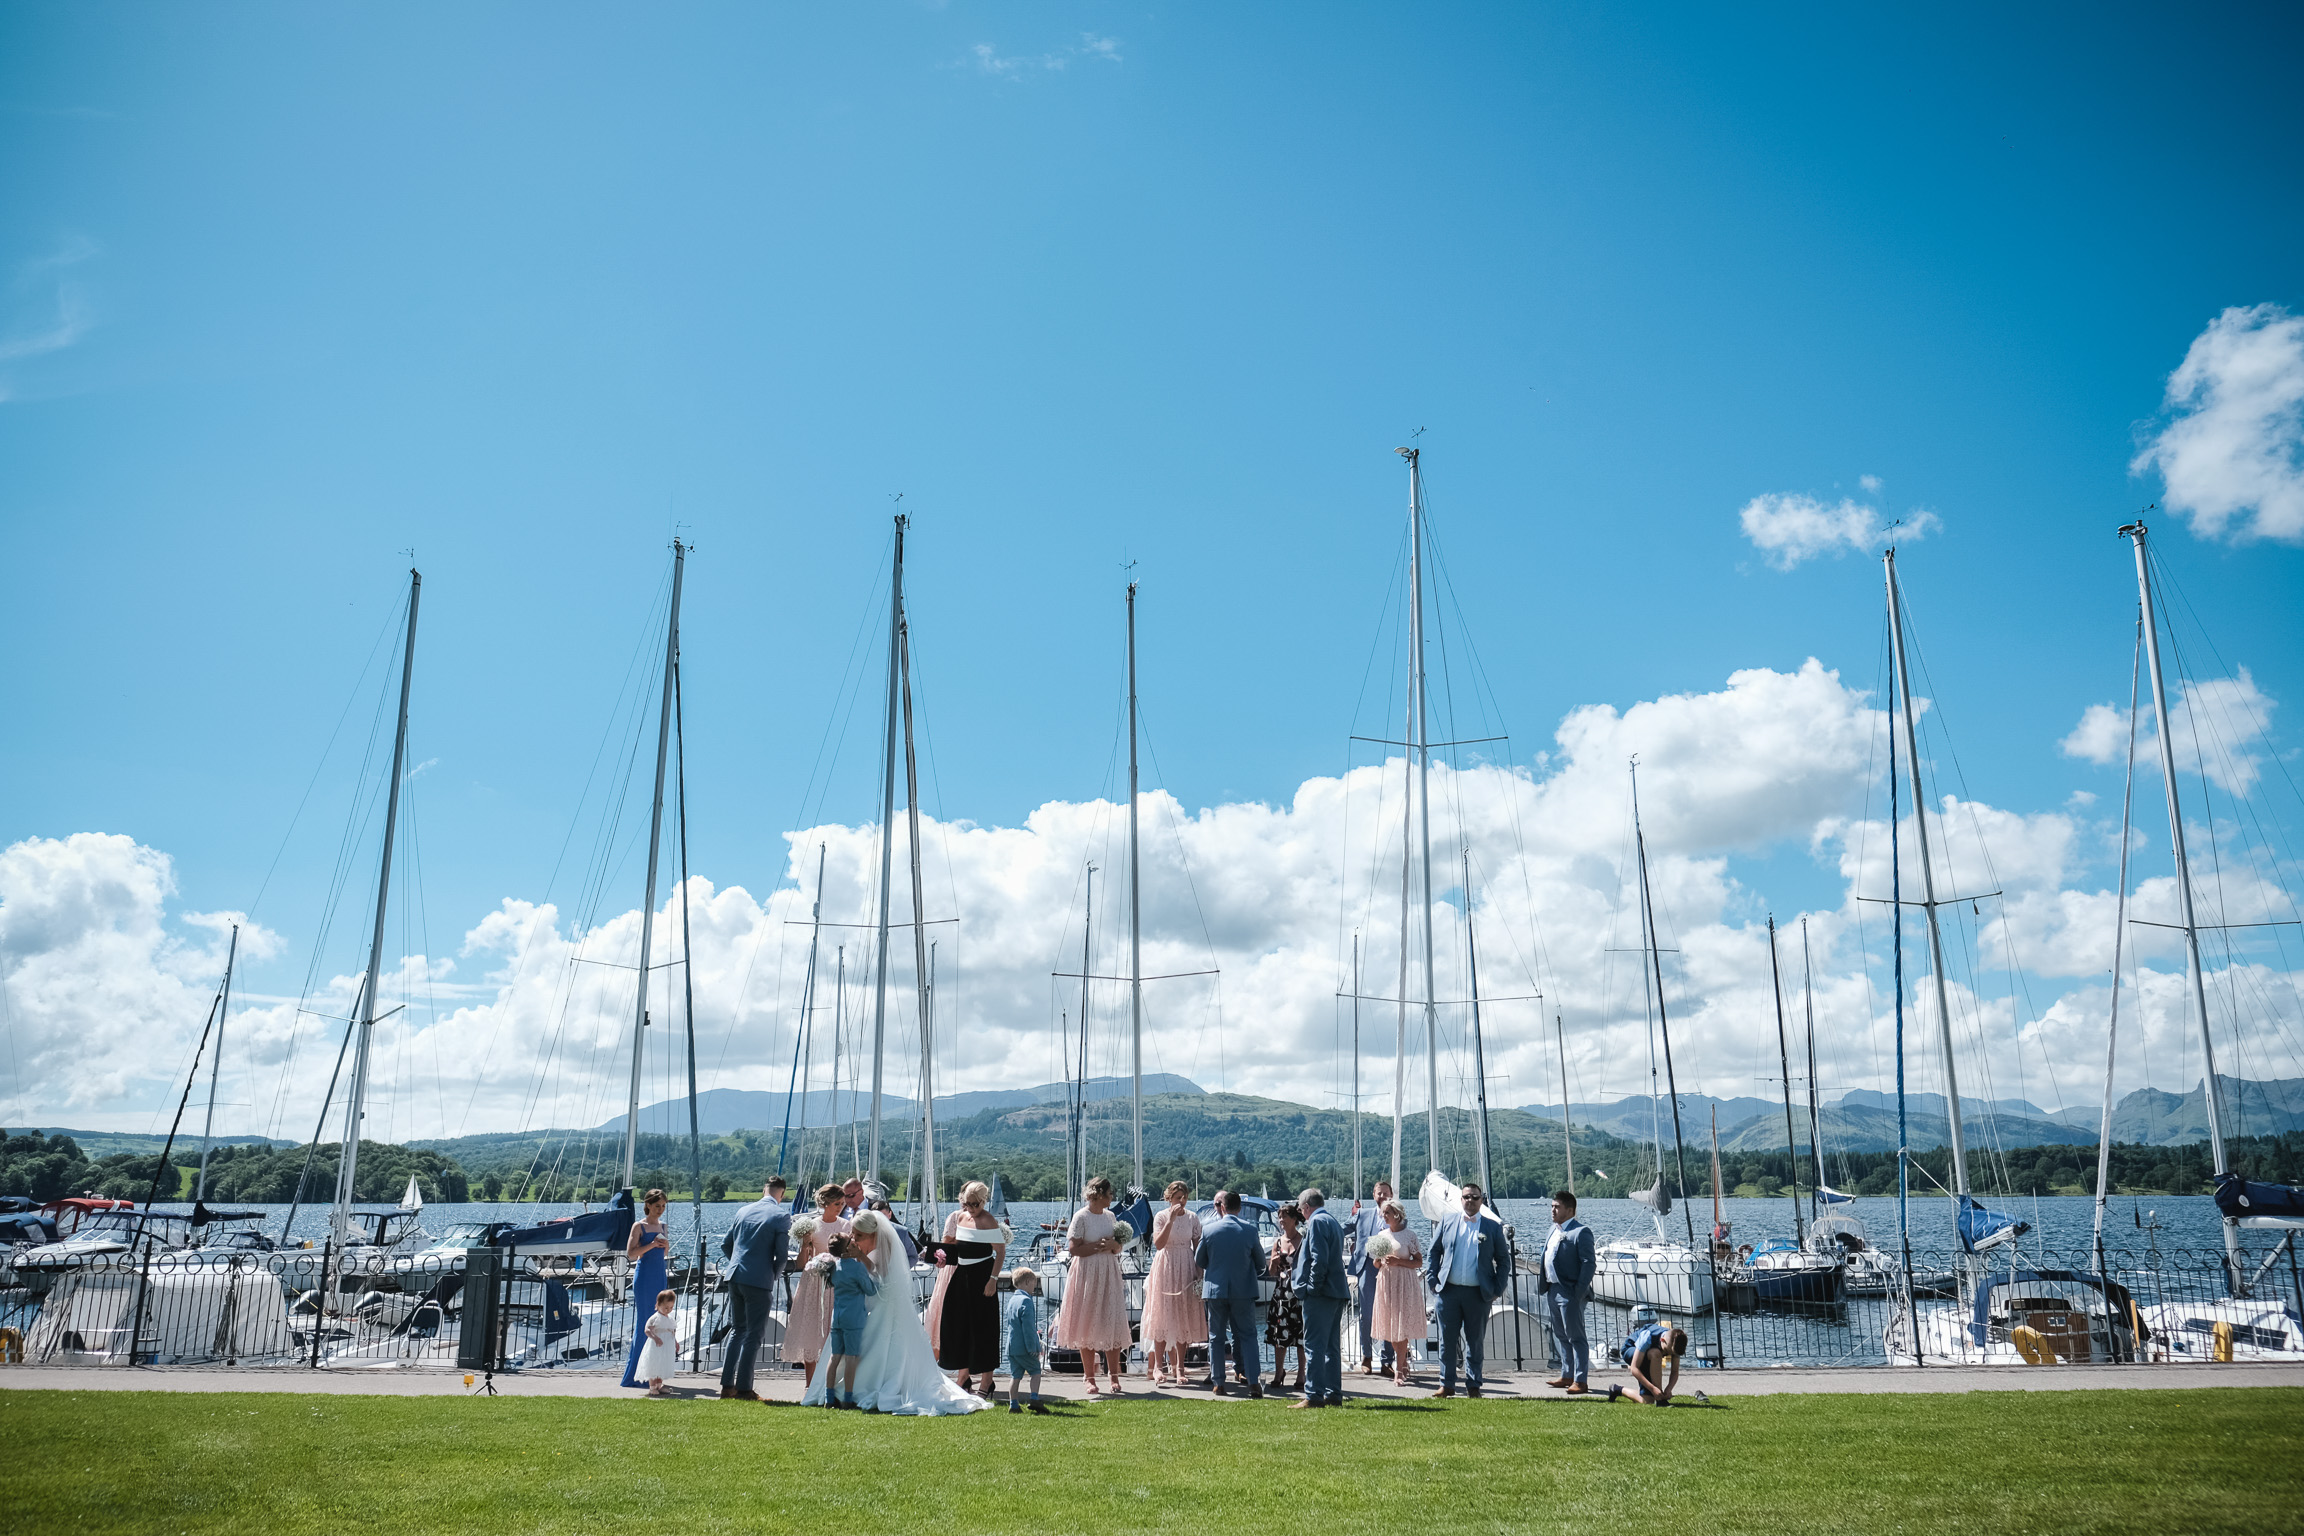 Low wood bay wedding photographer in widermere documentry wedding photography north west cumbria (59 of 131).jpg